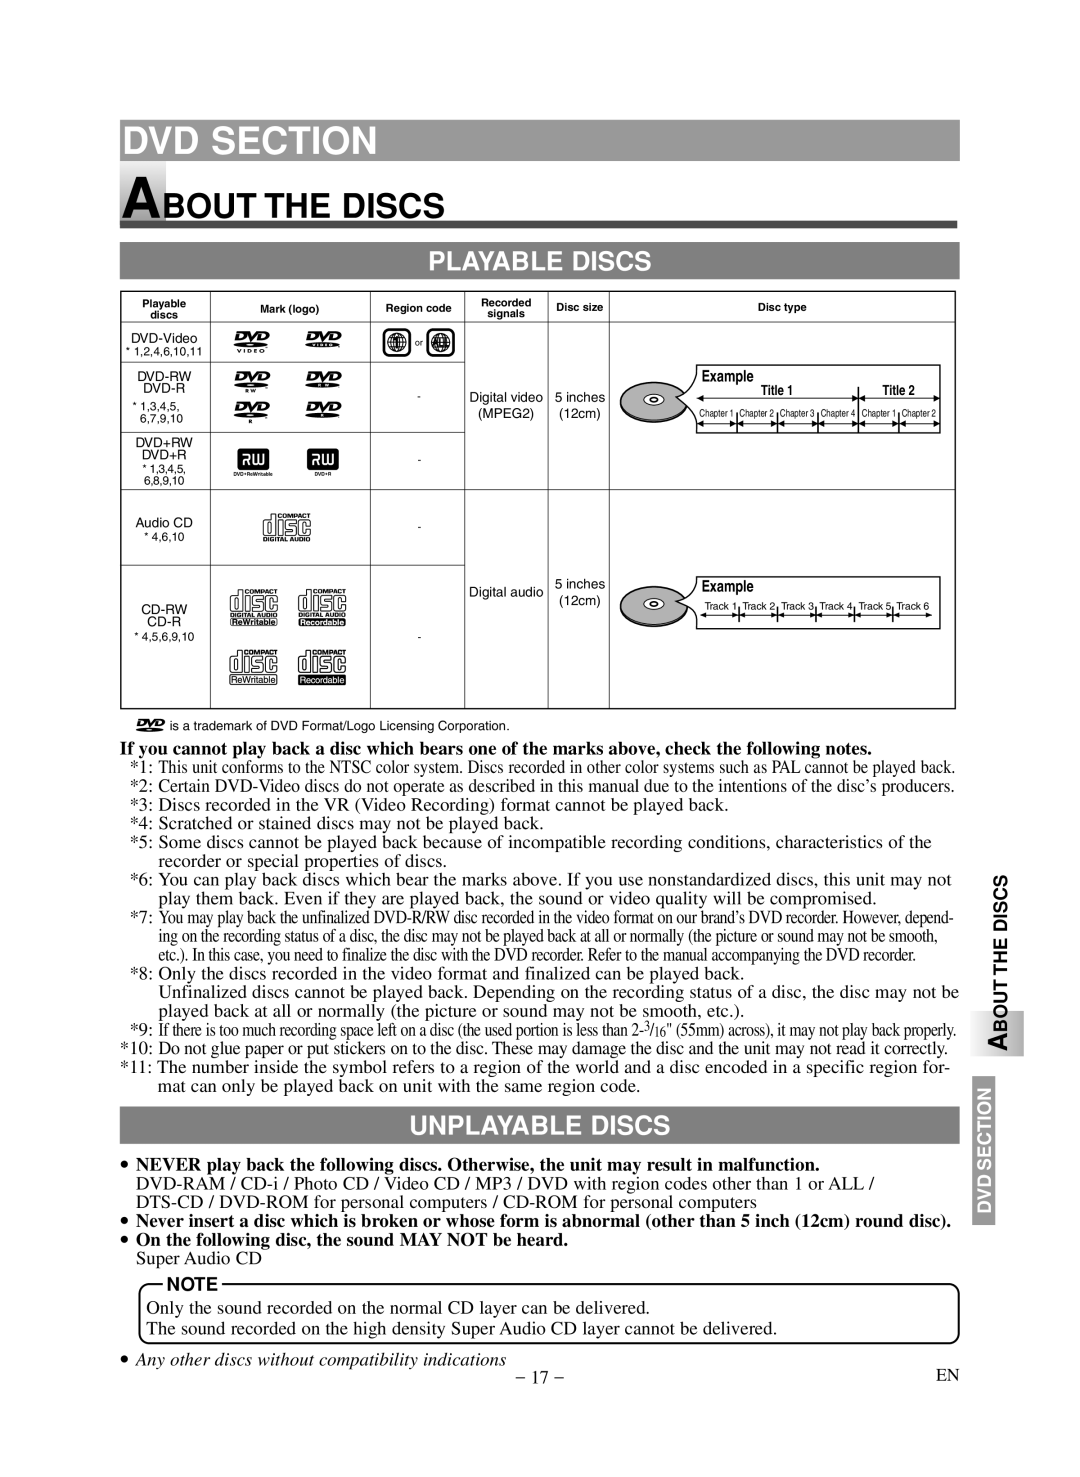 Symphonic LCD TV/DVD owner manual Dvd Section, About The Discs, Playable Discs, Unplayable Discs 